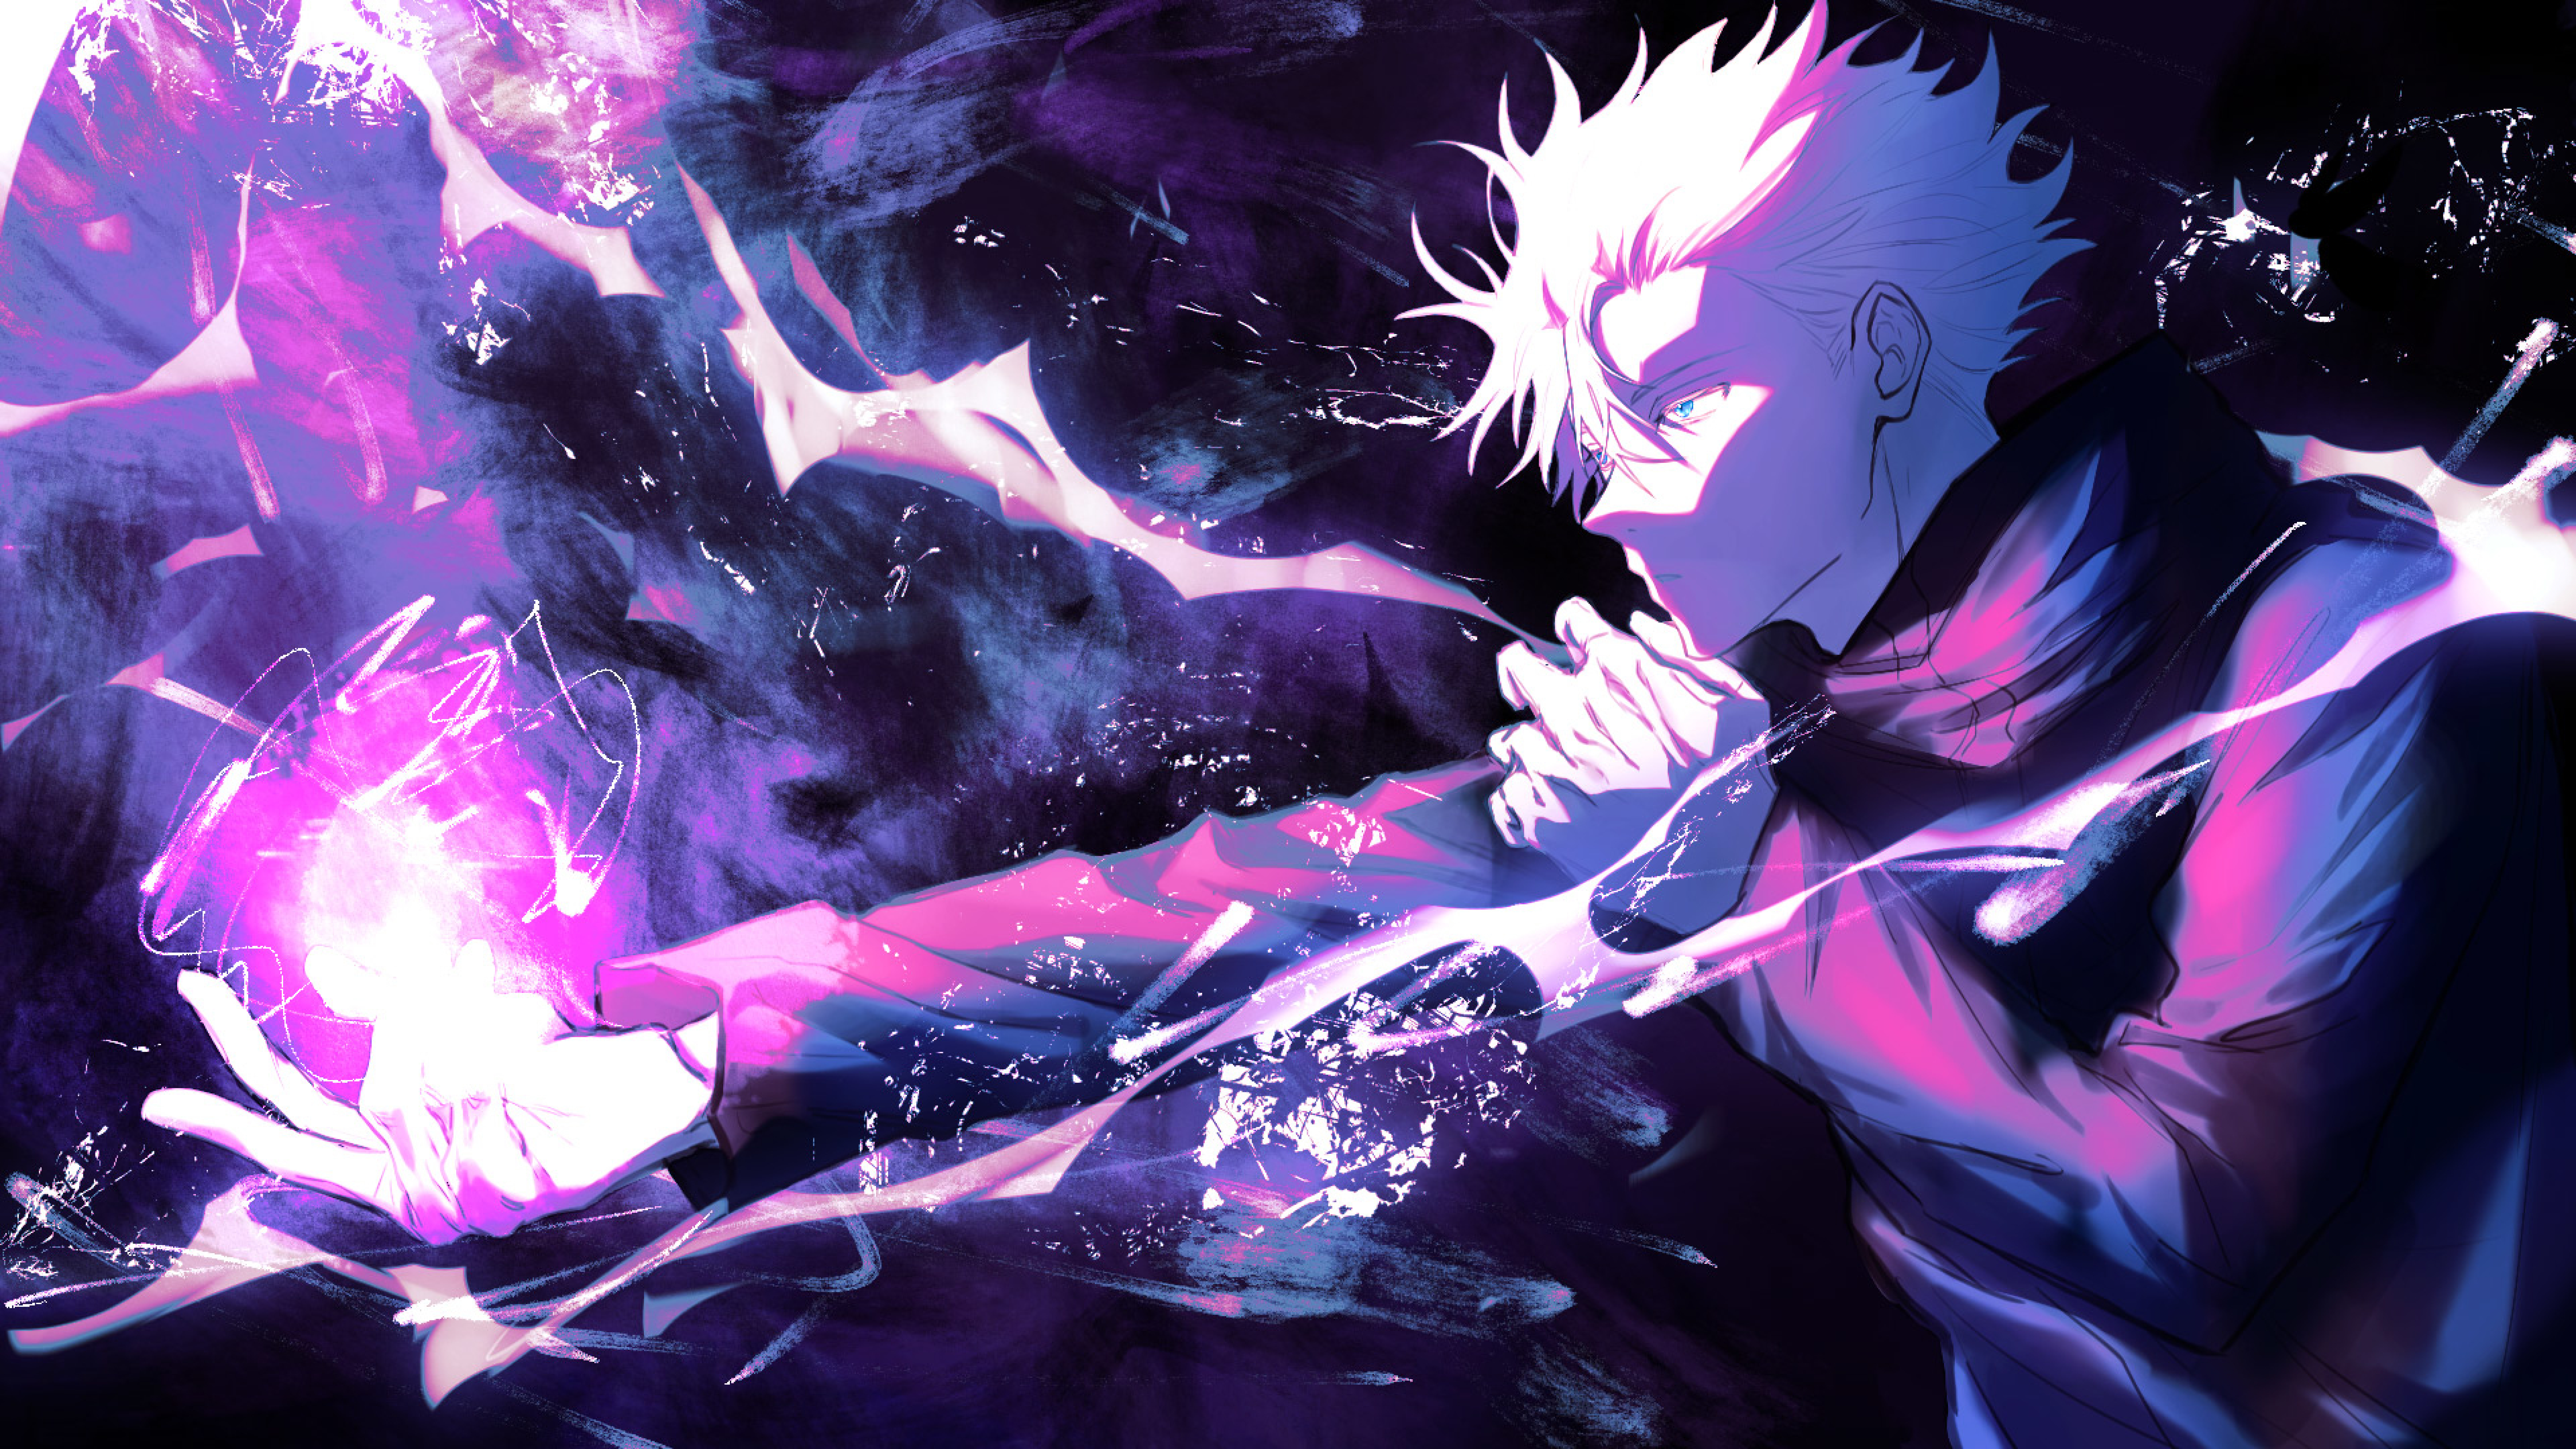 Demon Slayer Tanjiro Kamado With Sword With Blue Background 4K 8K HD Anime  Wallpapers  HD Wallpapers  ID 40623